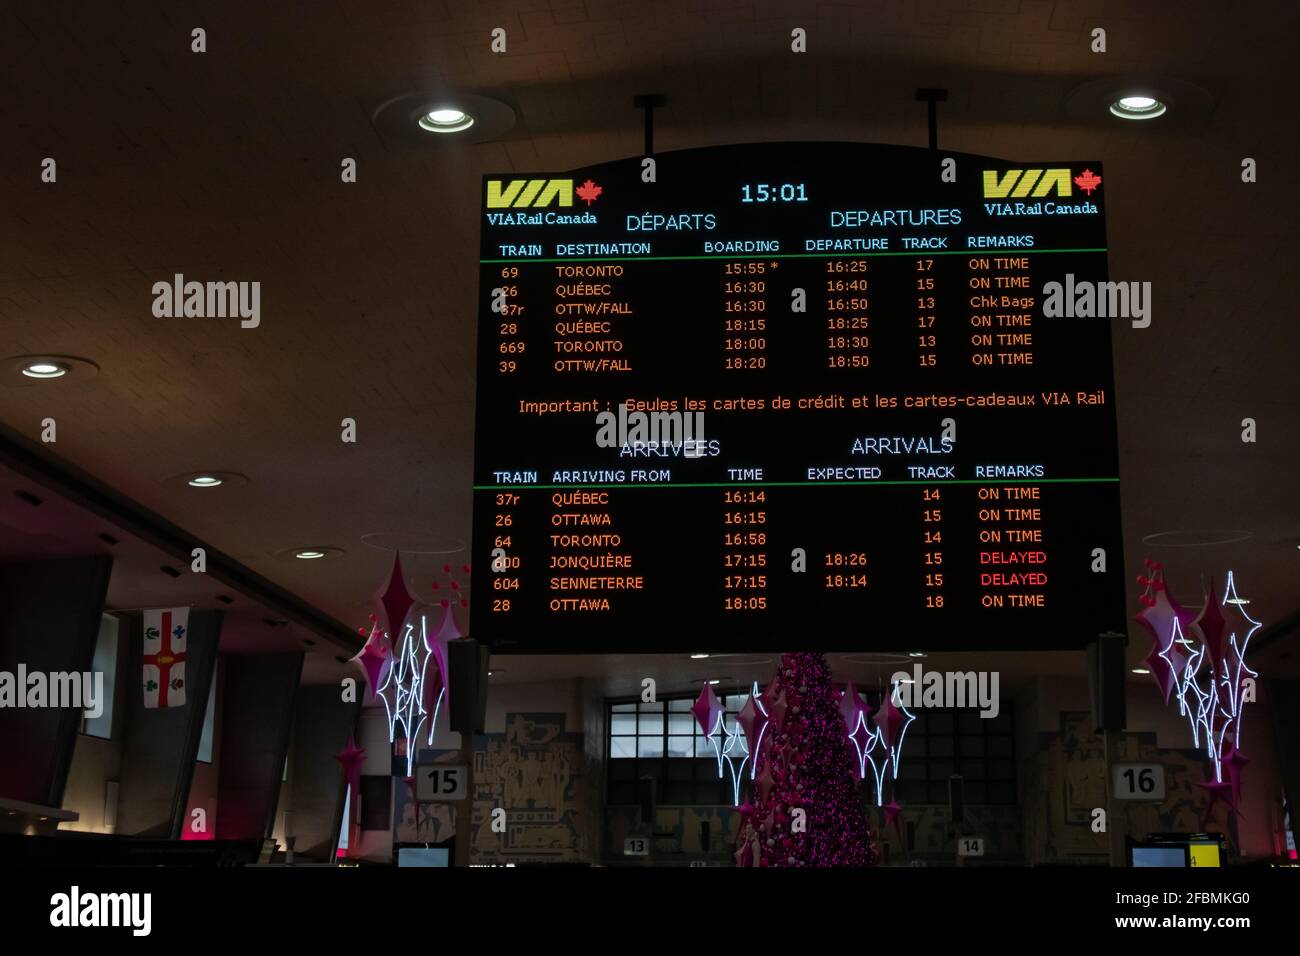 Montreal, Quebec, Canada - 1/2/2020: Electronic sign board hanging in VIA Rail's Central Station in Montreal shows train schedule. Stock Photo